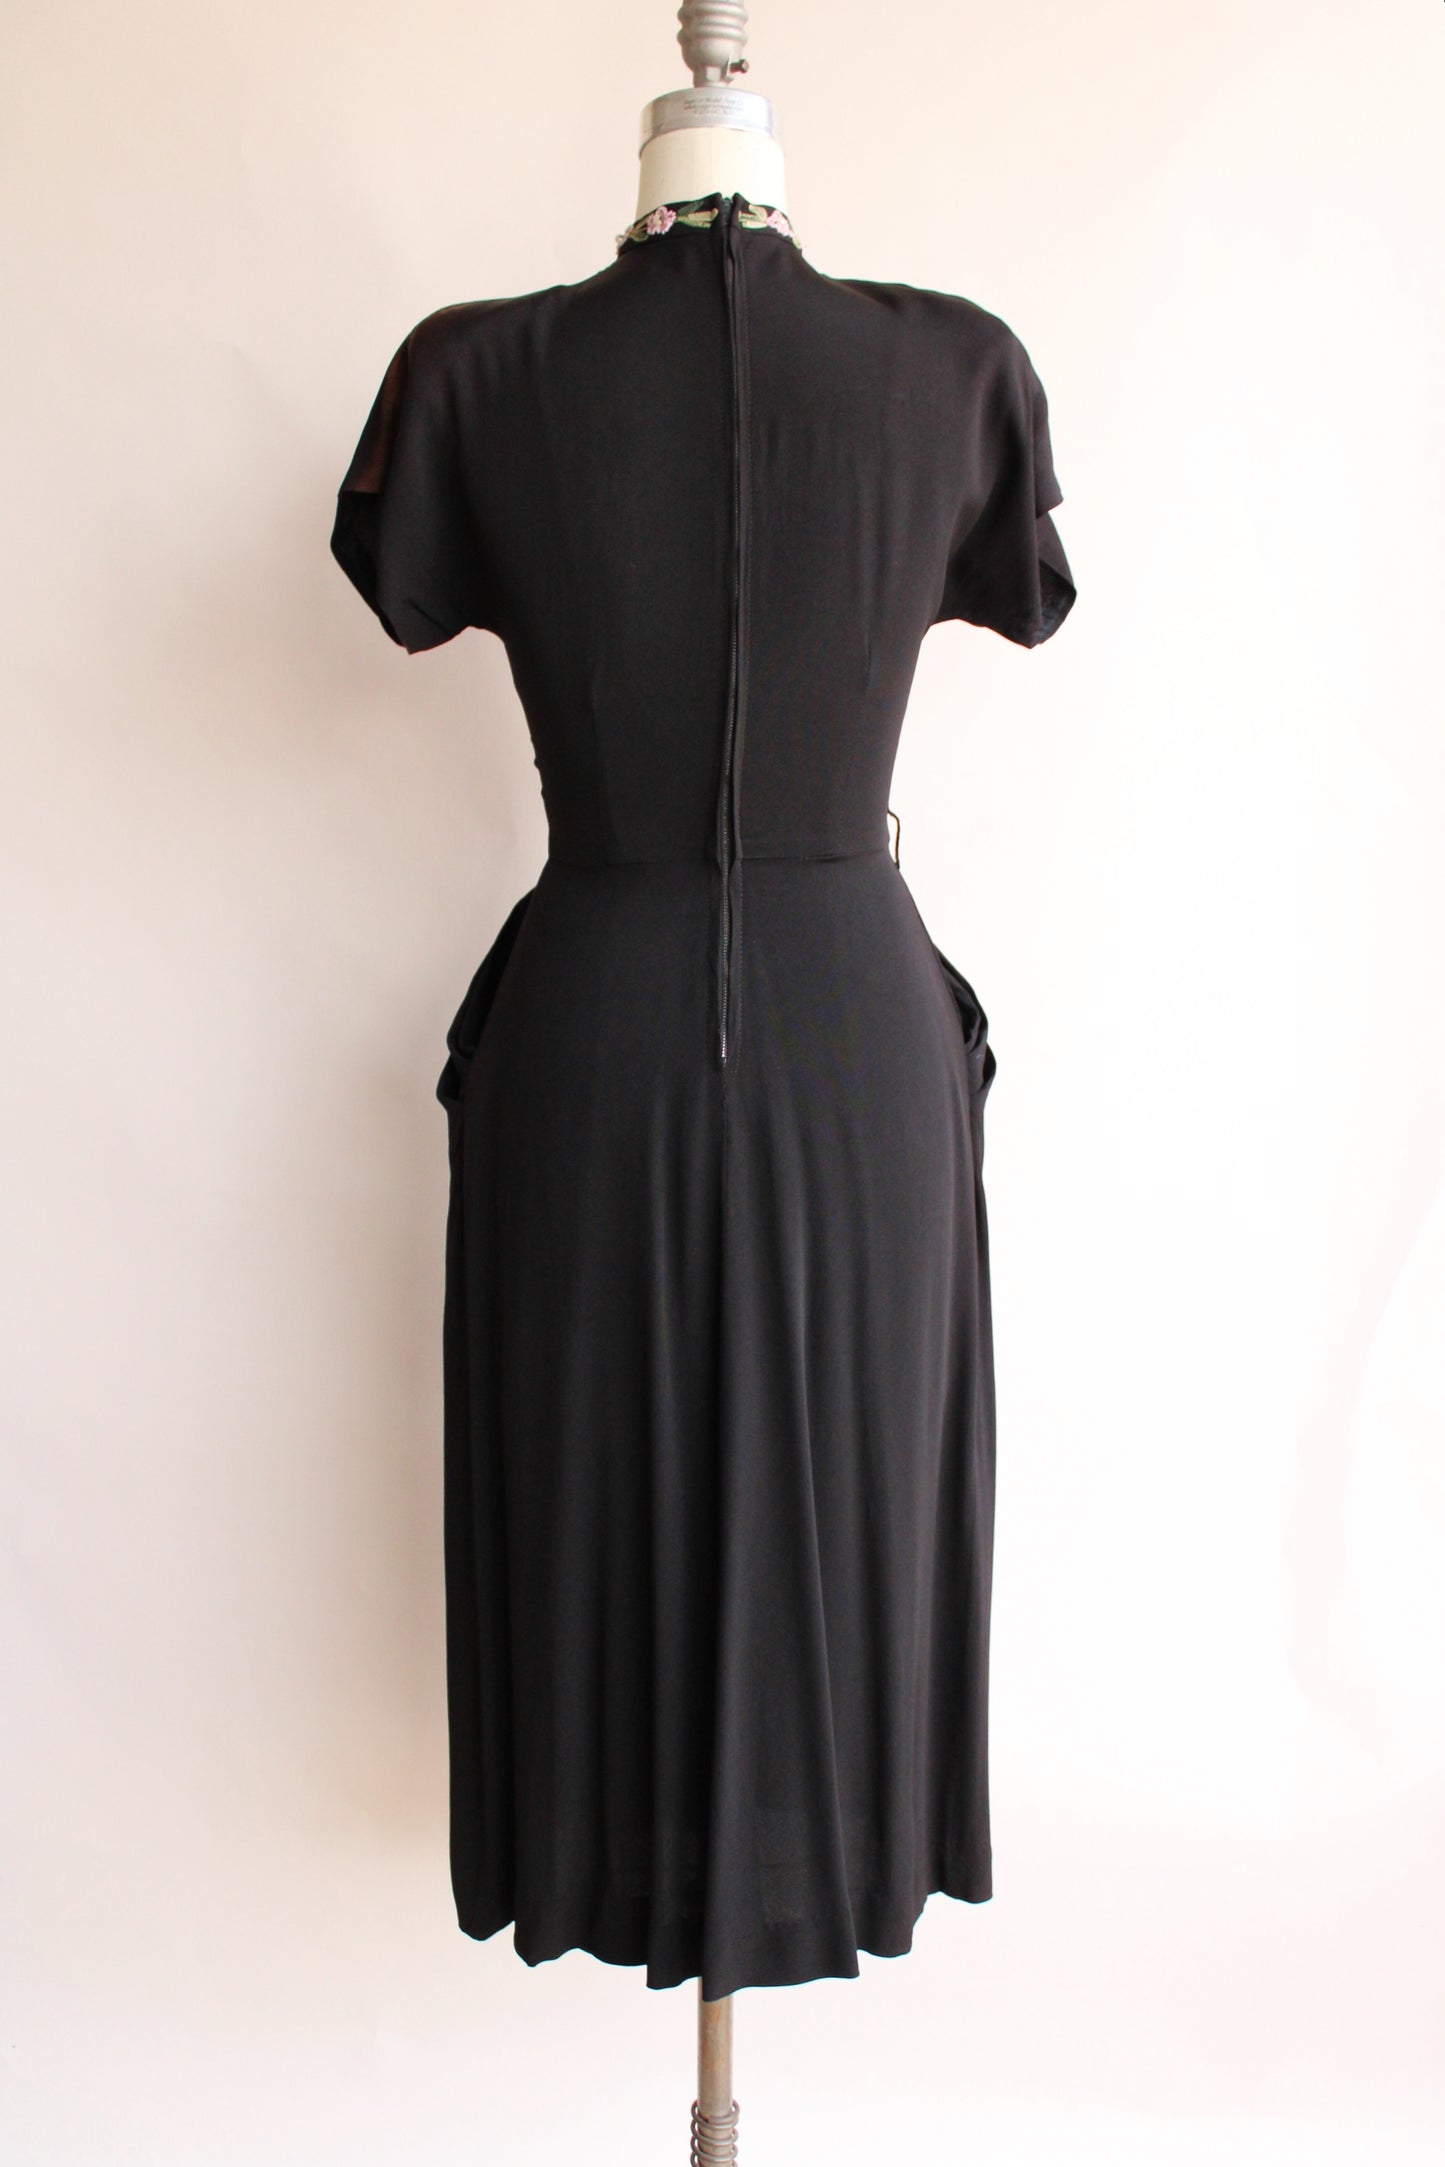 Vintage 1940s Black Dress with Floral Beading